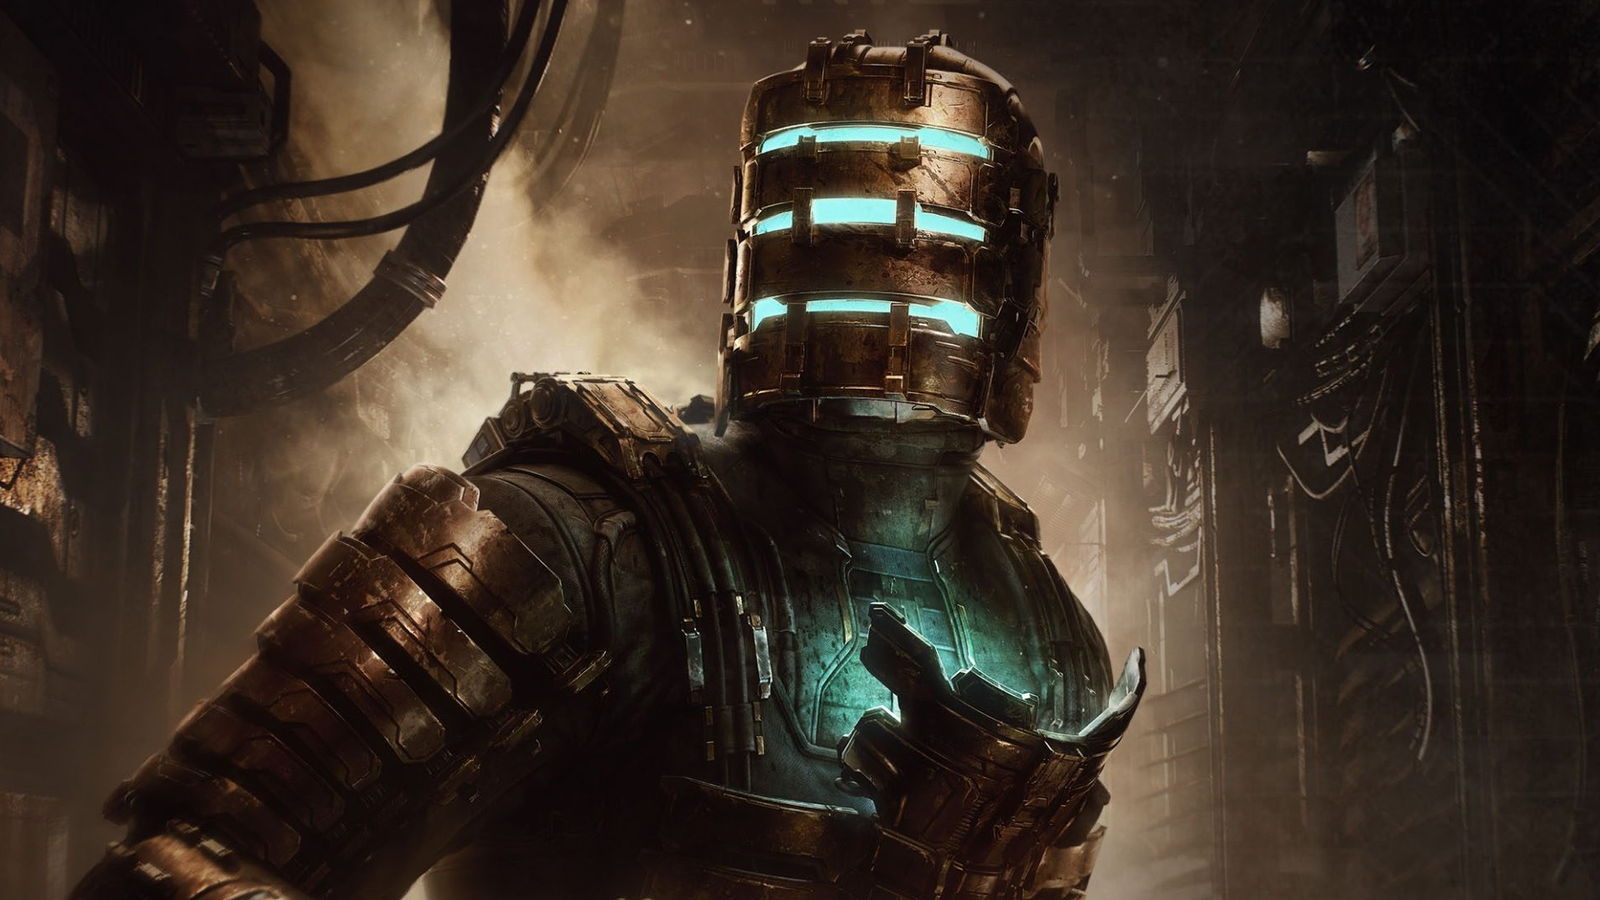 Dead Space Developers Have More Plans for Series Expansion